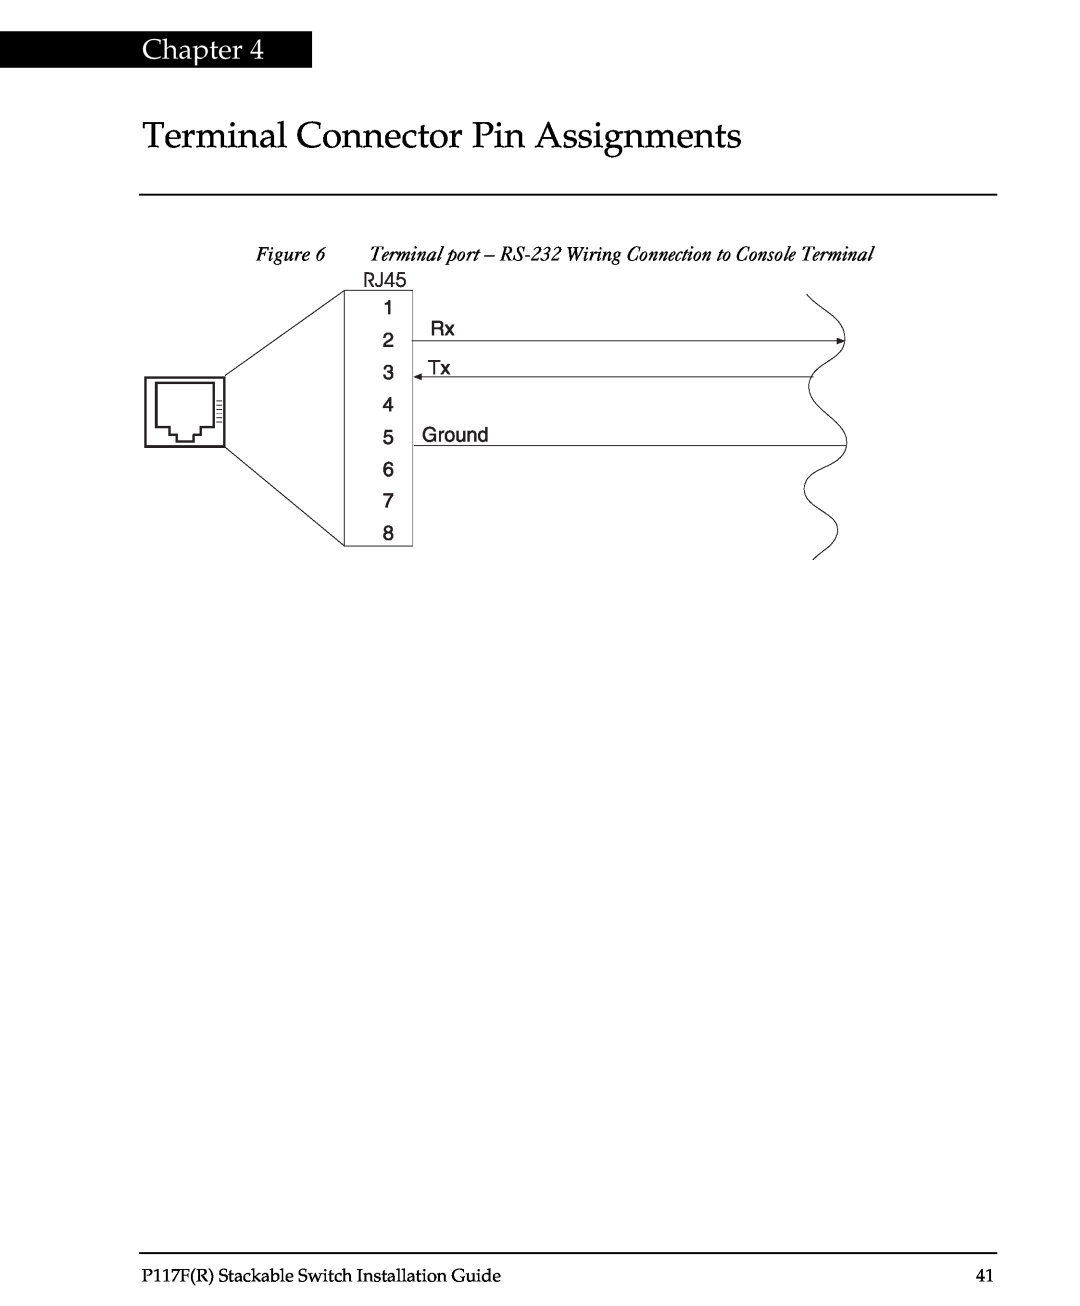 Avaya P117F(R) Terminal Connector Pin Assignments, Terminal port - RS-232 Wiring Connection to Console Terminal, Chapter 